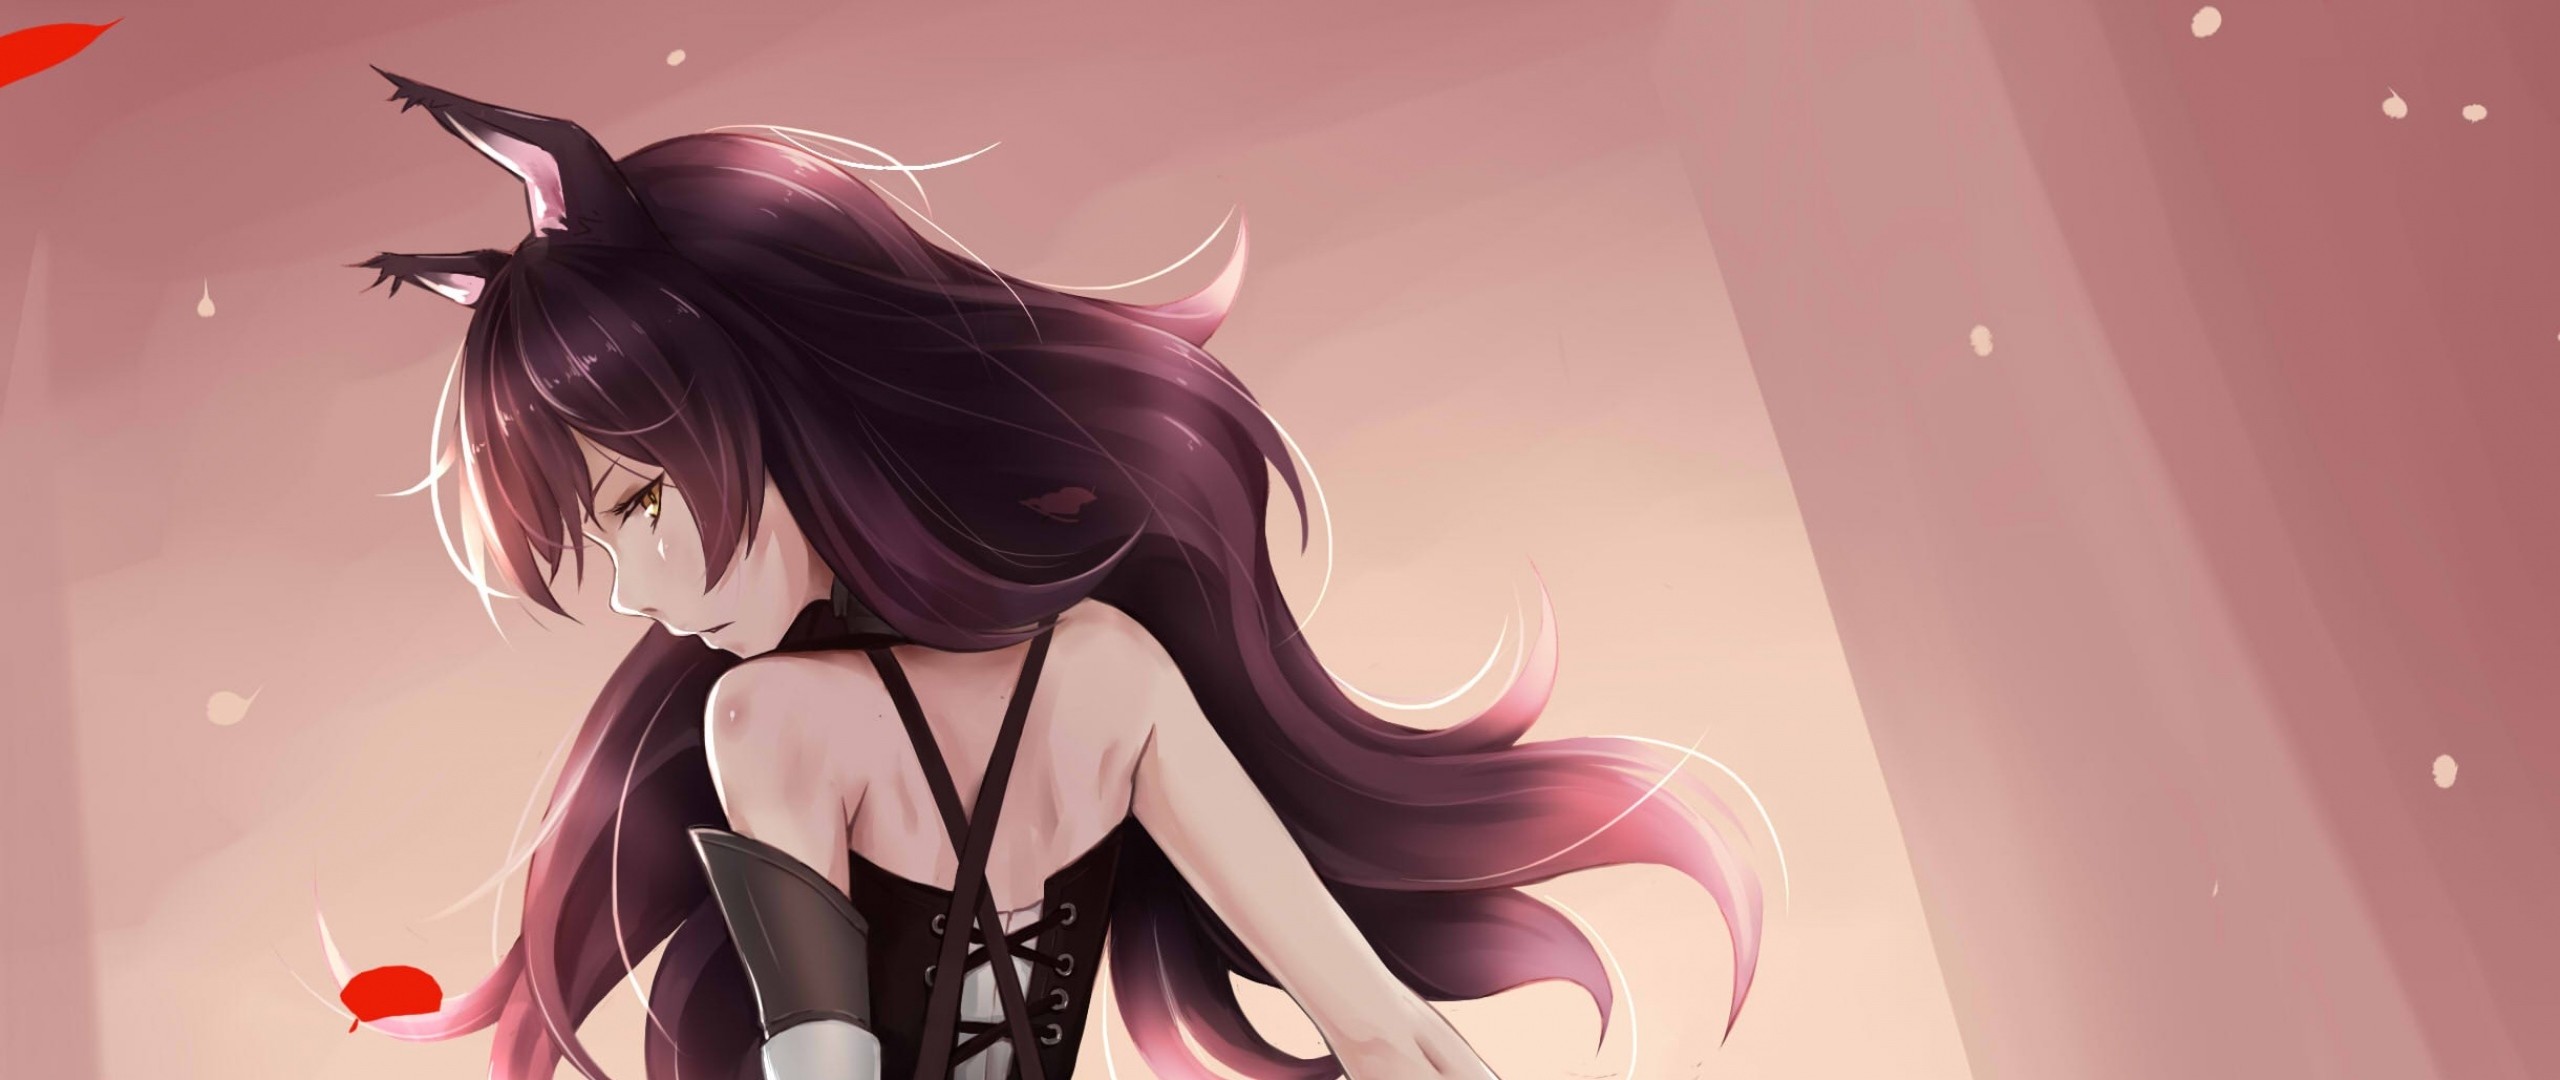 Mobile wallpaper: Anime, Rwby, Blake Belladonna, 1068840 download the  picture for free.